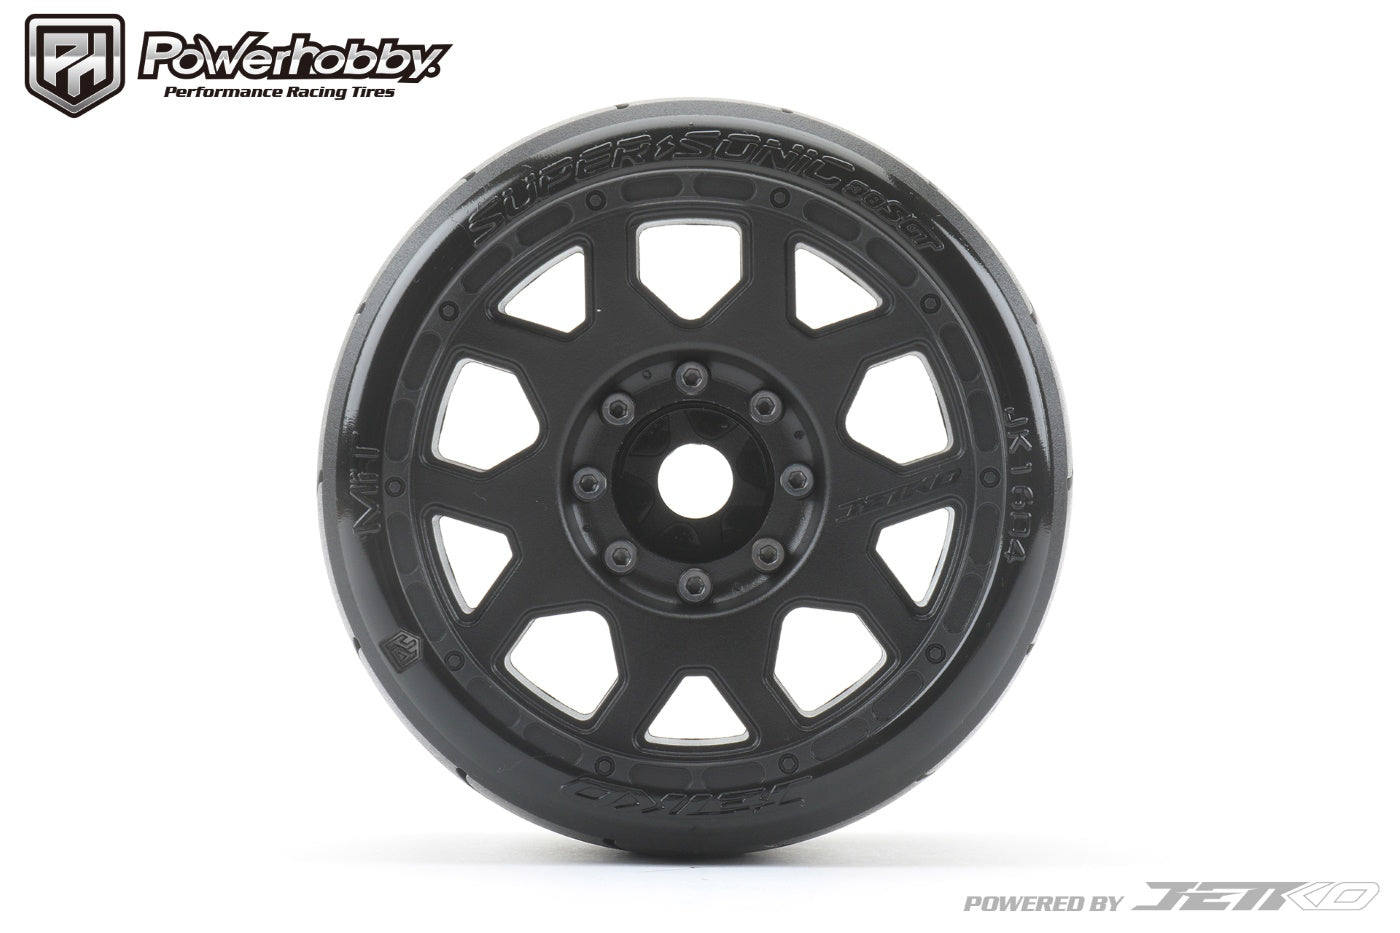 Powerhobby 1/8 SGT 3.8 Super Sonic Belted Mounted Tires w Removable Hex Wheels (2) - PowerHobby